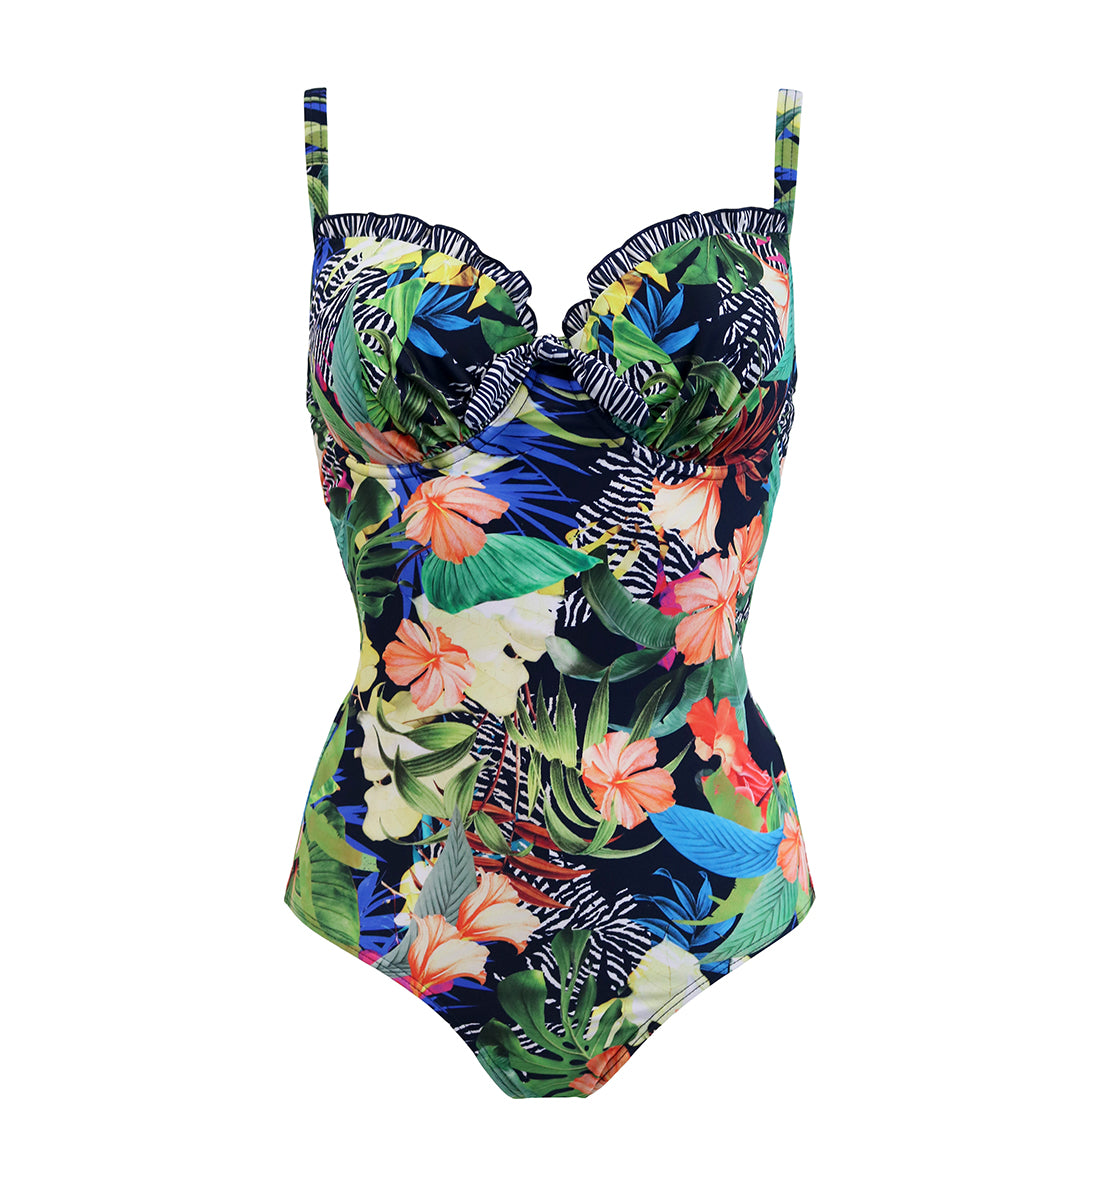 Pour Moi Havana Breeze Padded Underwire Control Swimsuit (13413),32G,Tropical - Tropical,32G